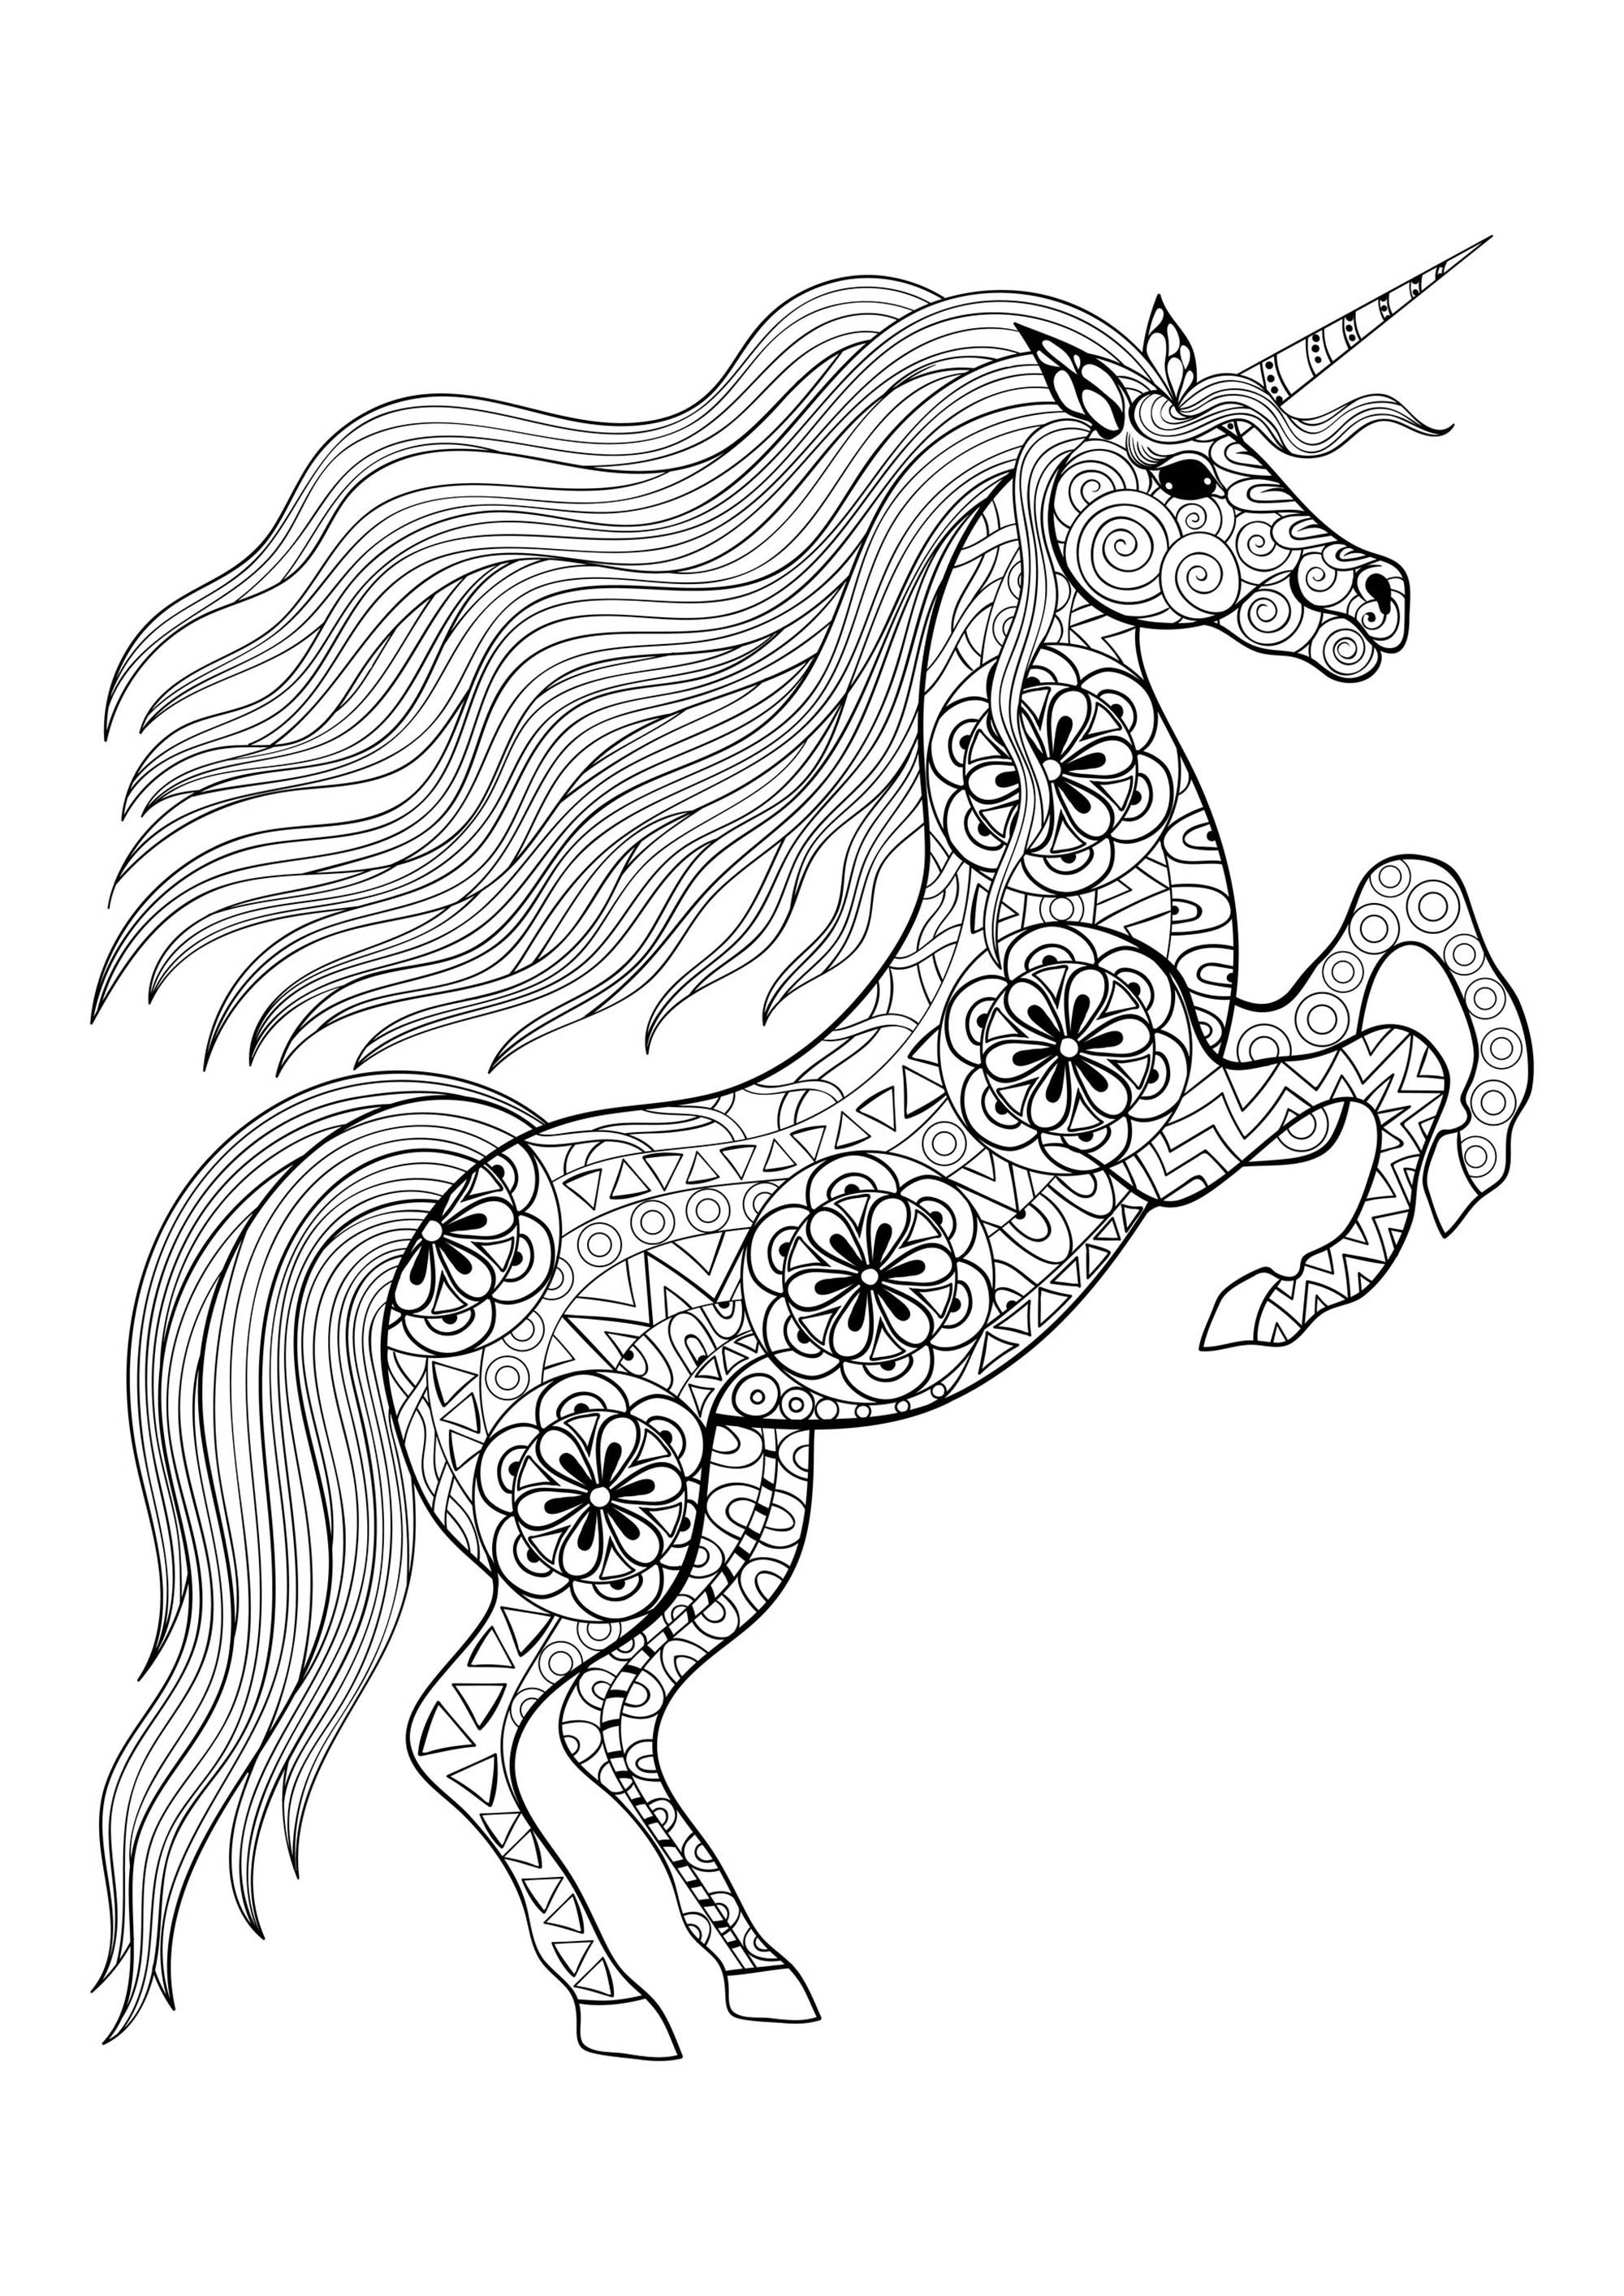 Color this beautiful unicorn coloring page with your favorite colors